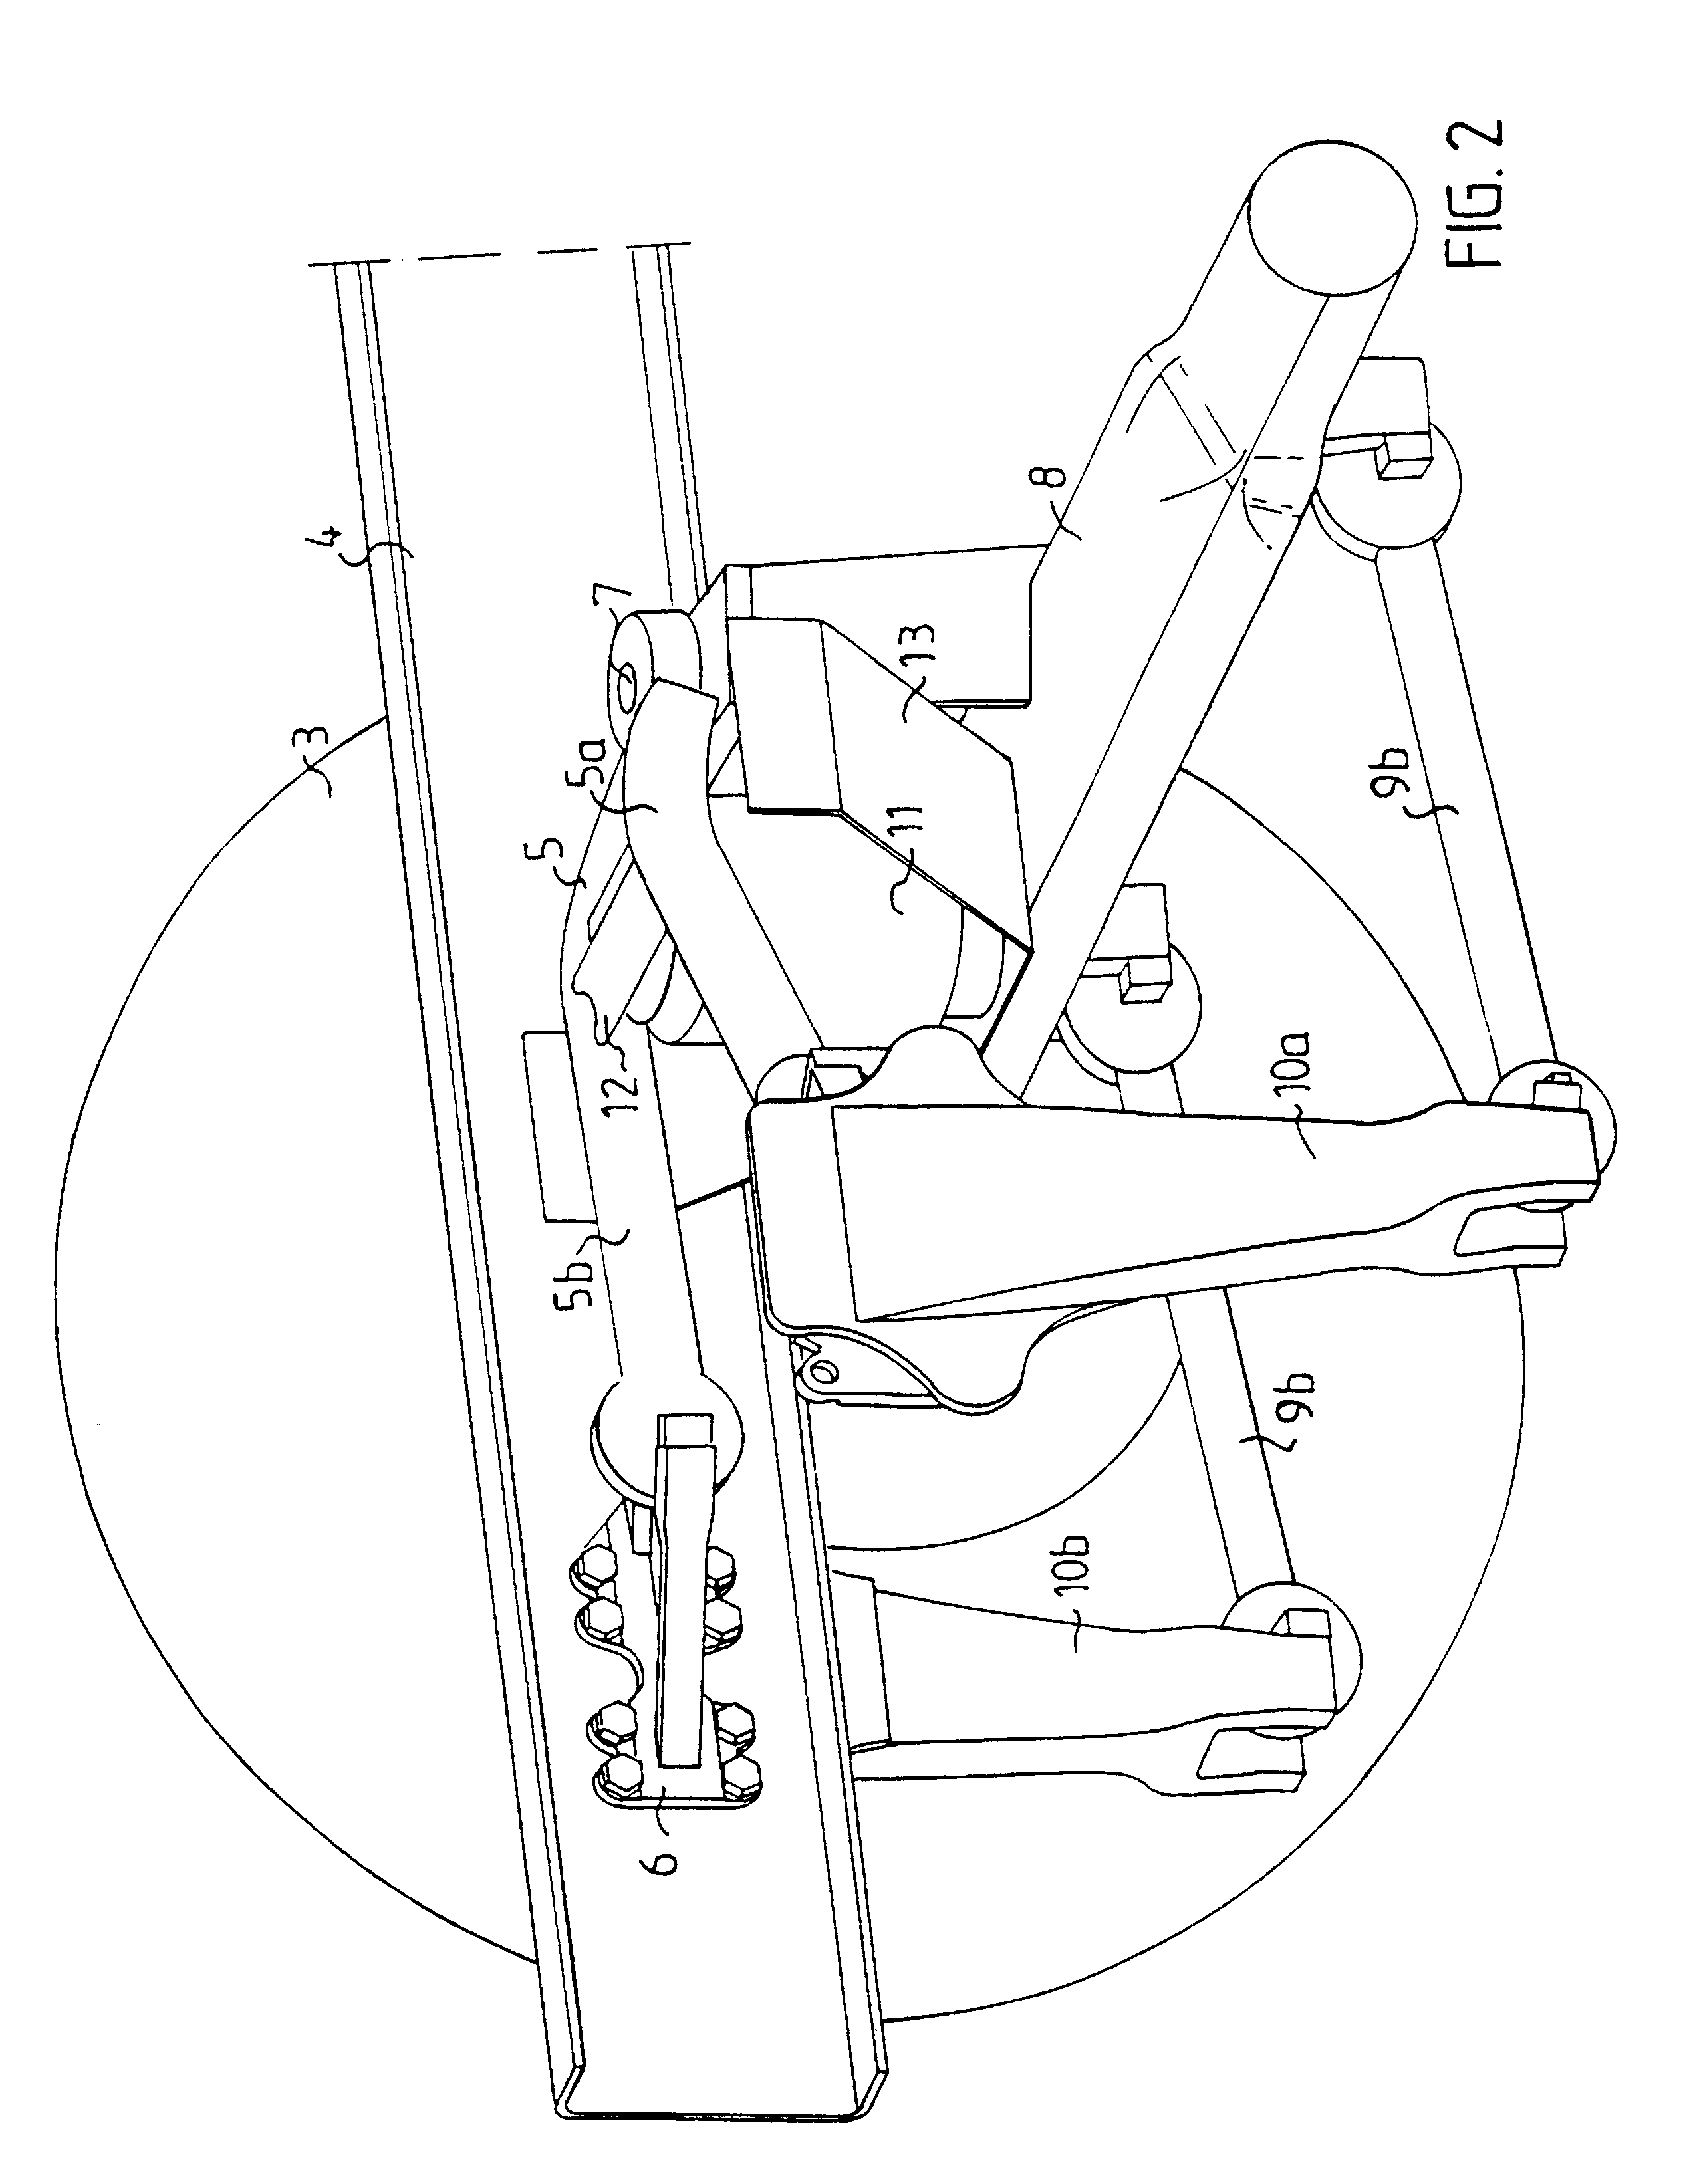 Axle lifting device for a vehicle